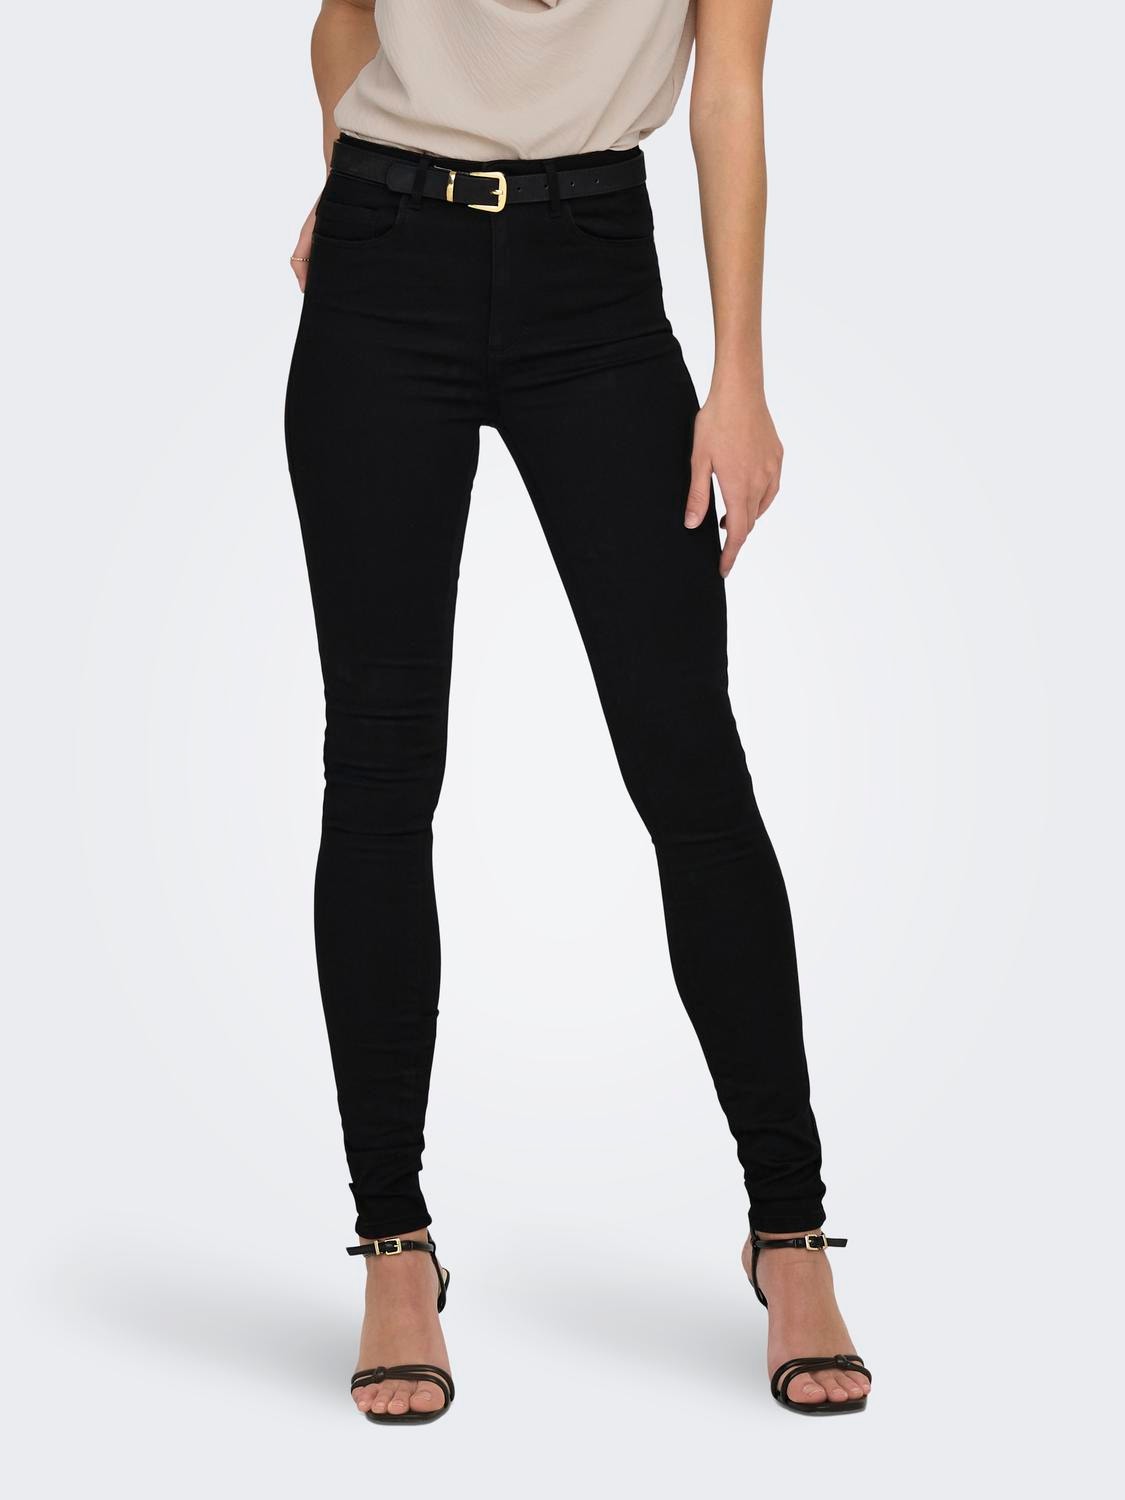 ONLY ONLRoyal high Skinny fit jeans -Black - 15093134